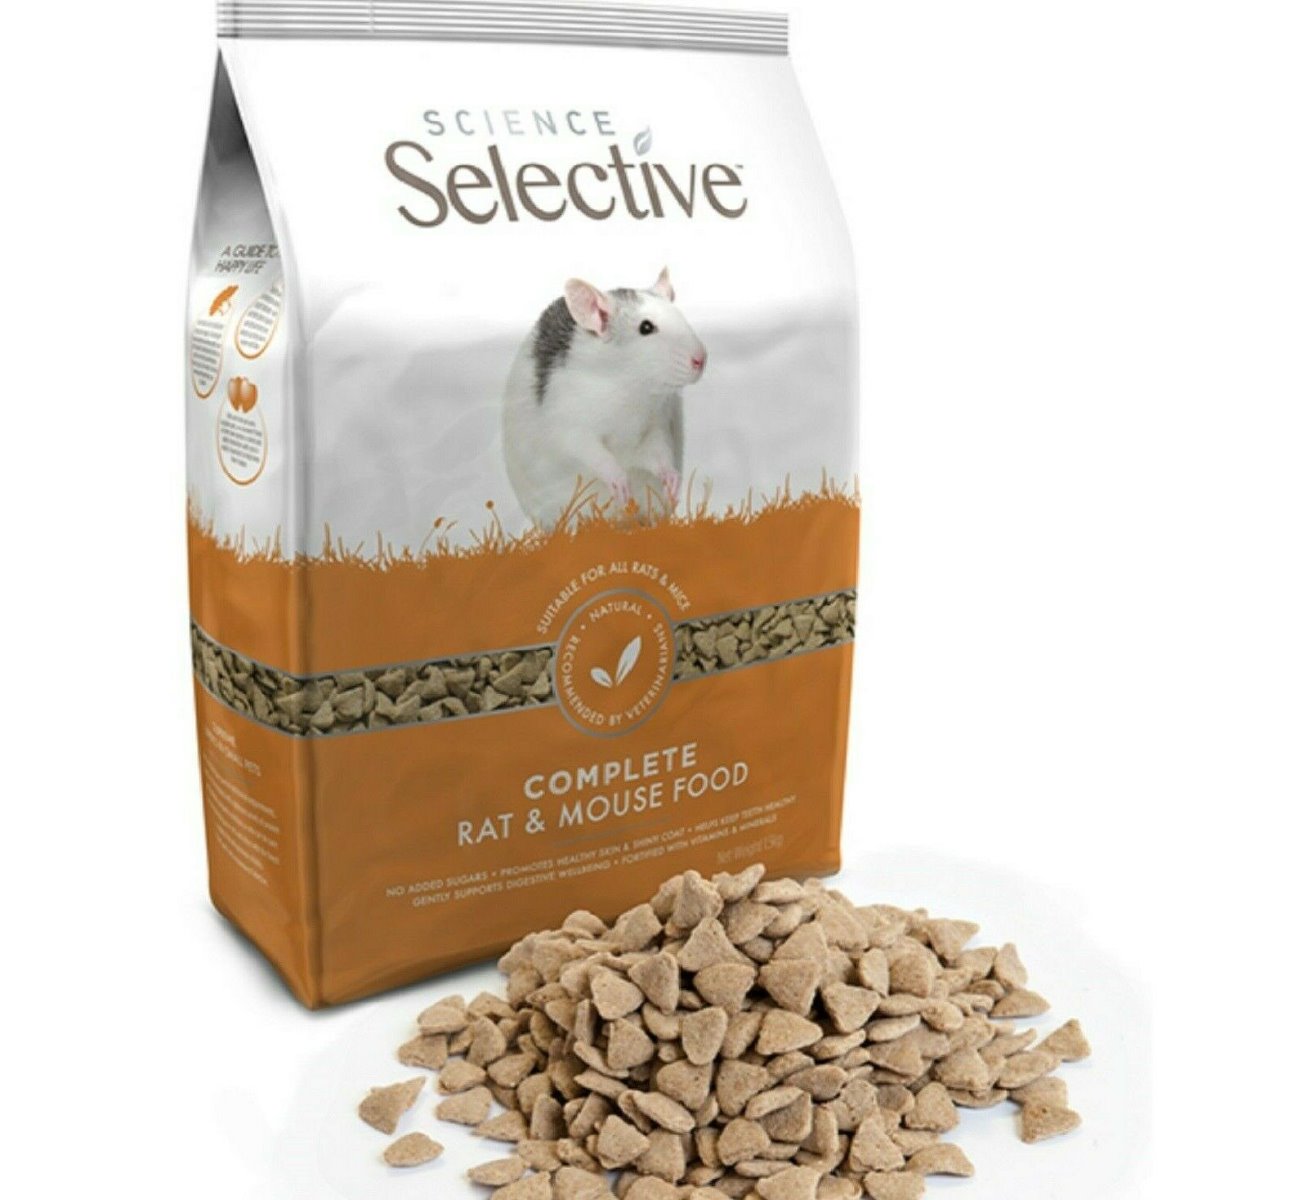 Science Selective - Complete Rat and Mouse Food